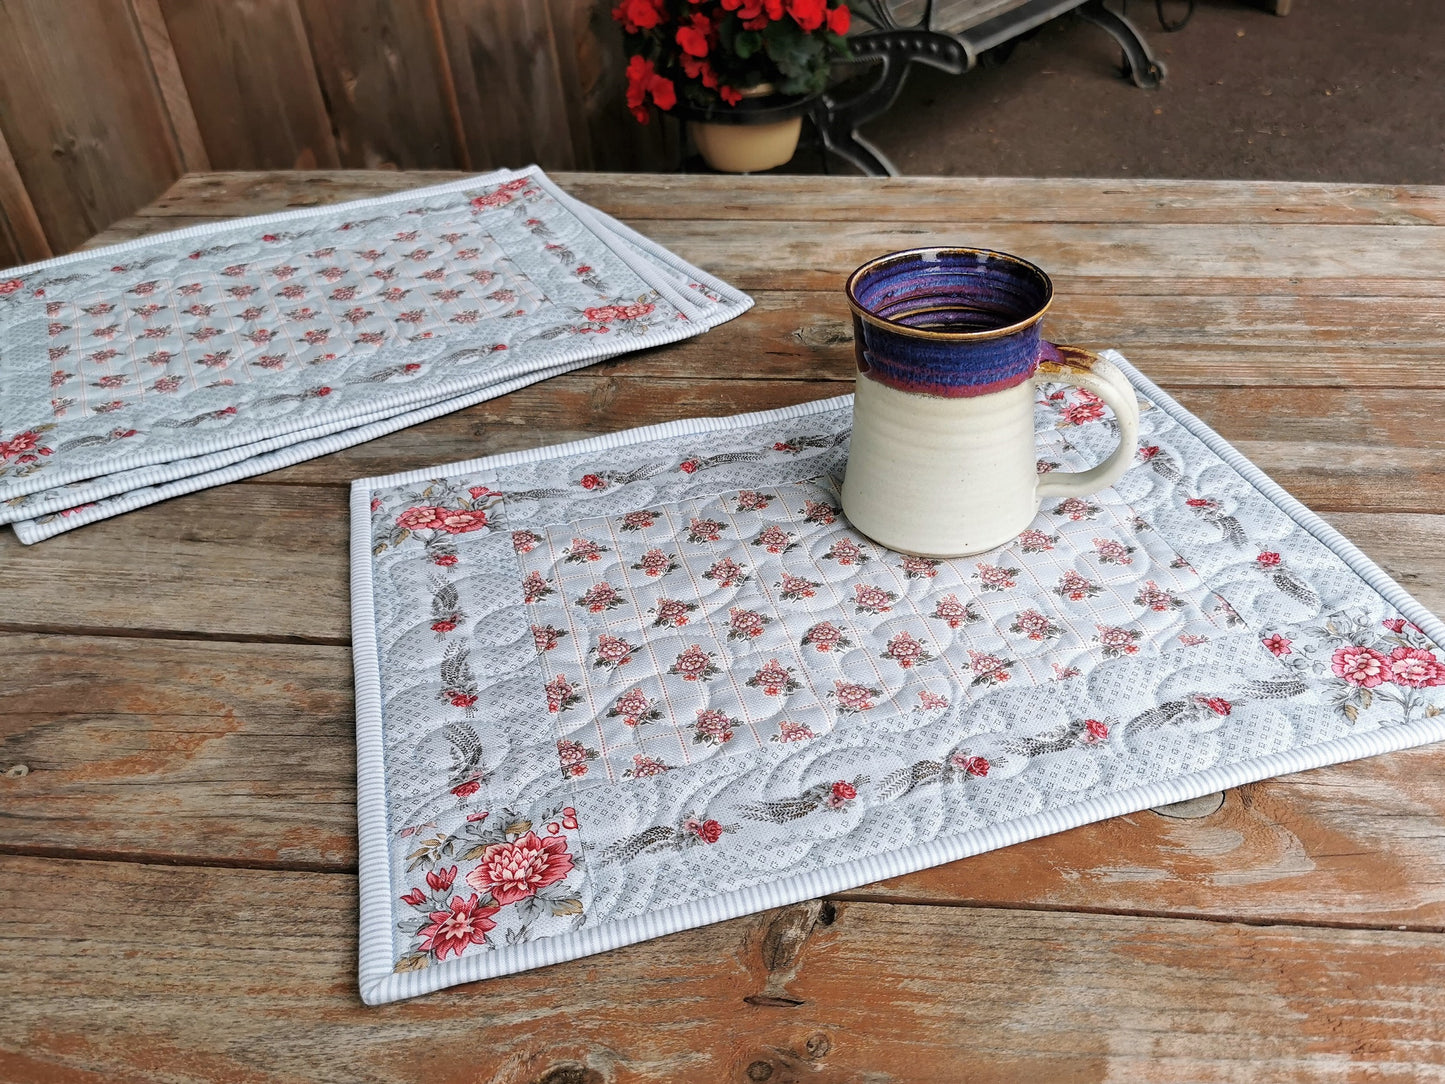 ONe quilted placemat is shown in the foreground with a pottery mug to show scale. Other table mats are stacked in background. This is an outdoor porch setting. 